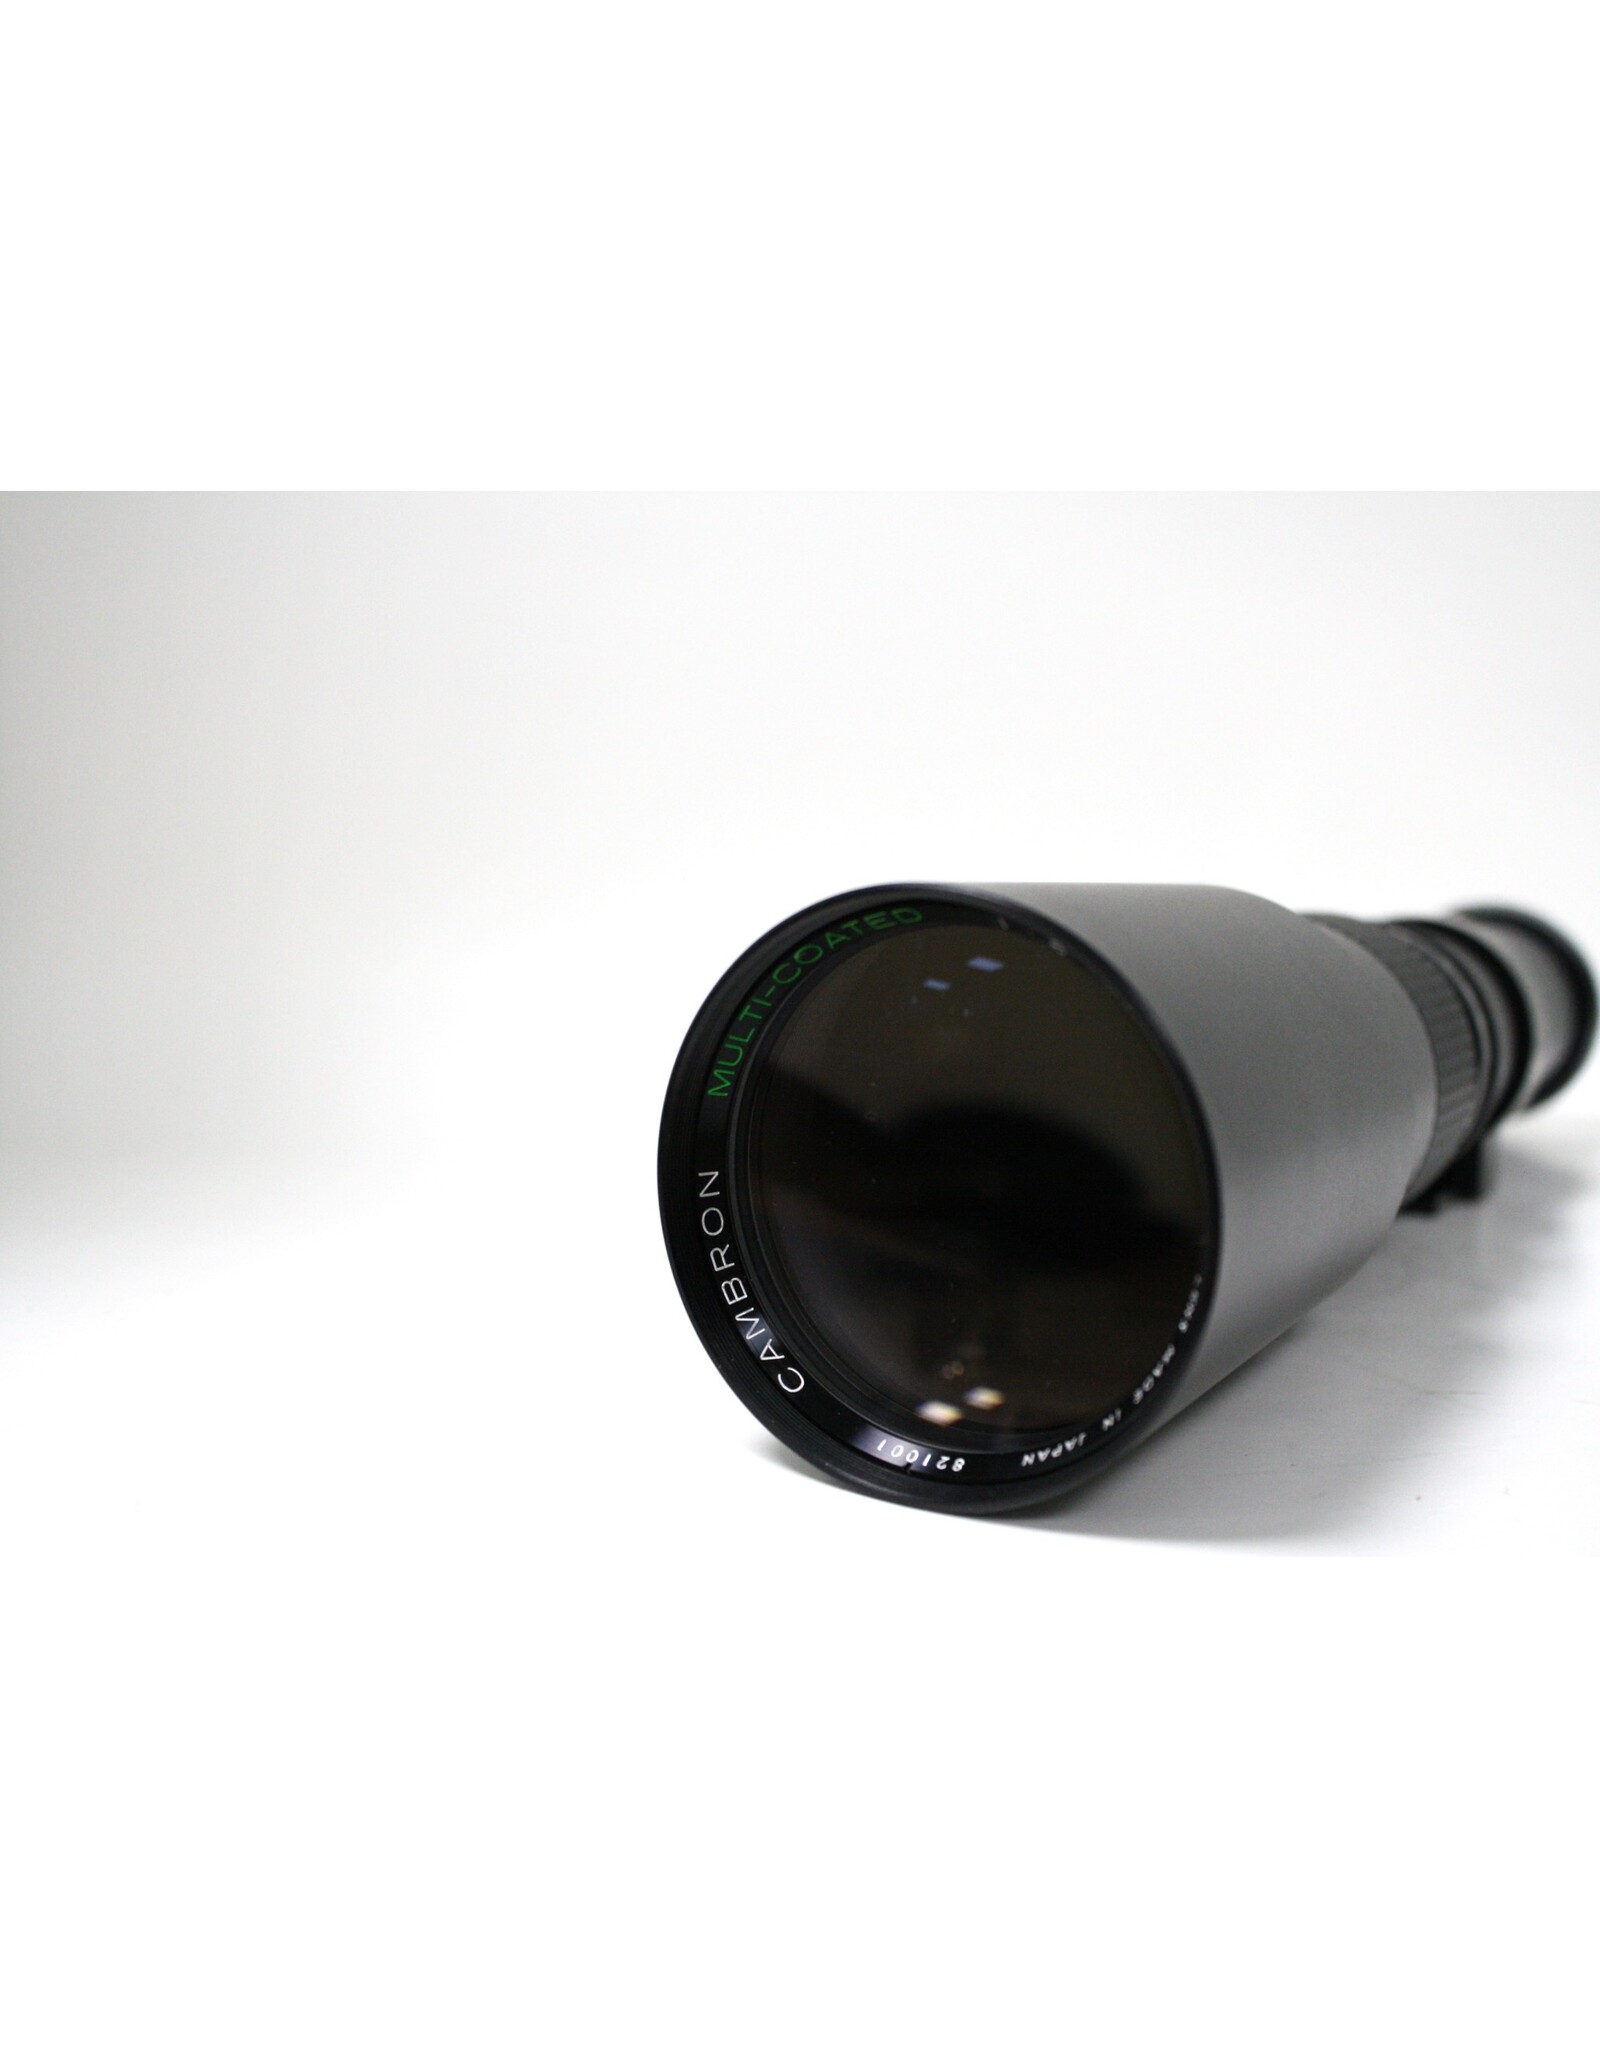 Cambron 500mm f8 Multi Coated Lens (T Mount Adaptable) - Camera